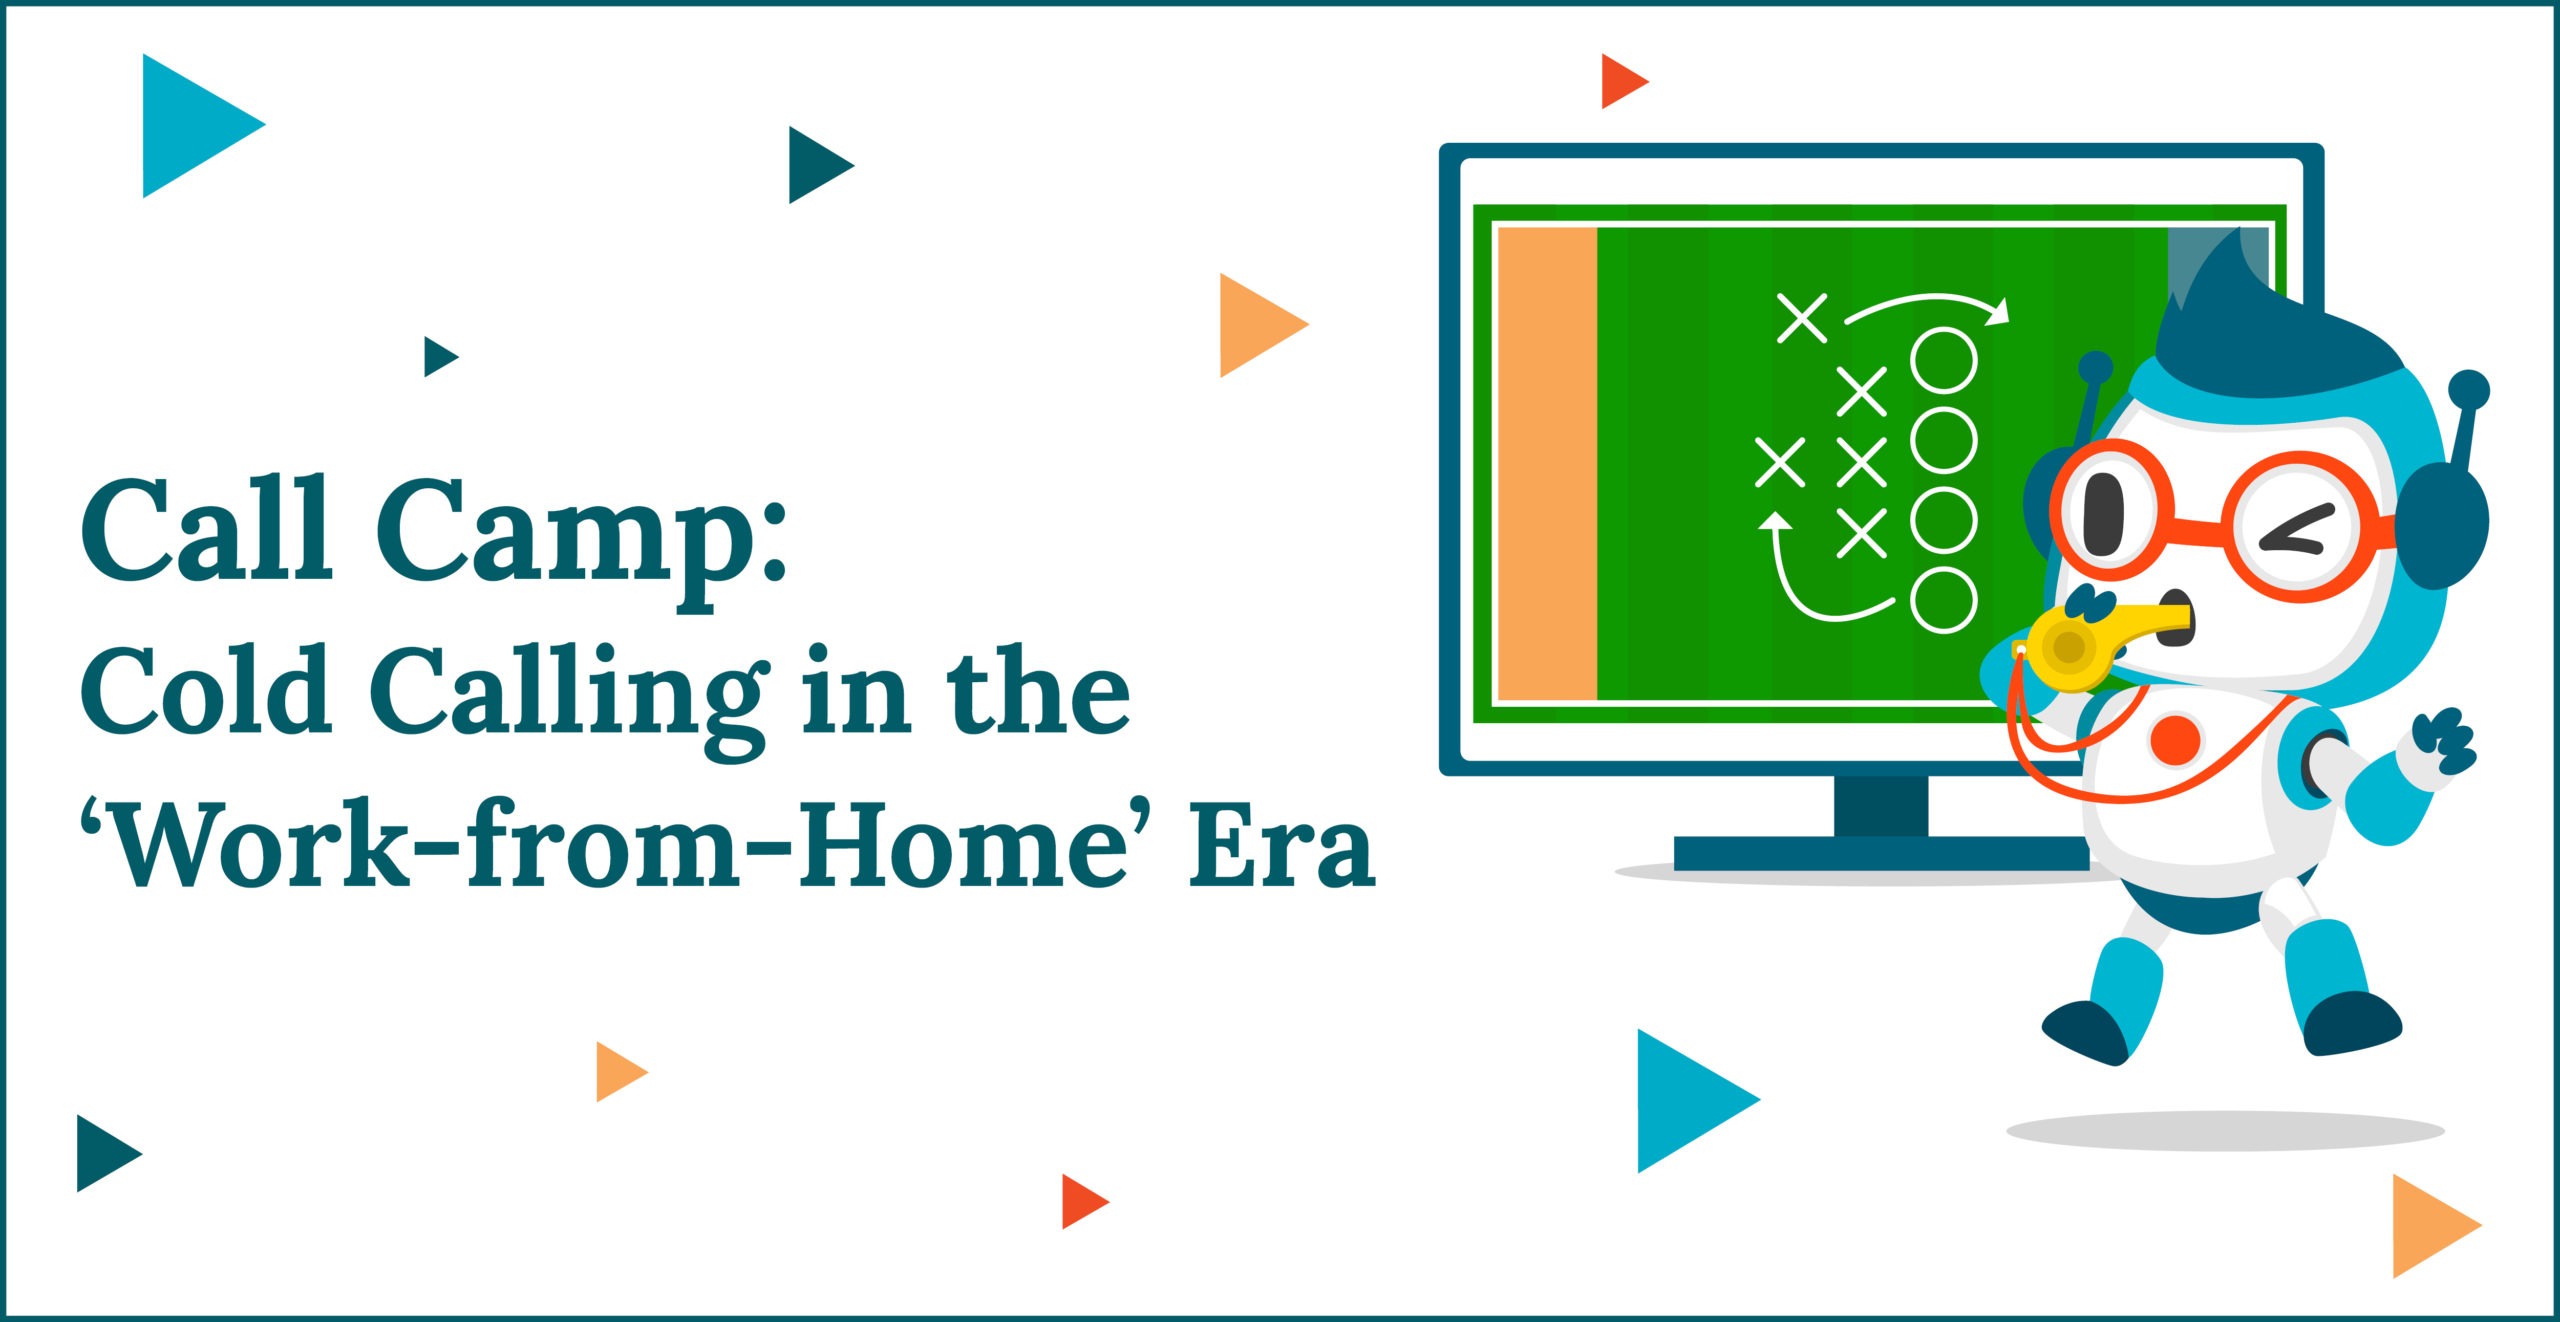 Call Camp: Cold Calling in the ‘Work-from-Home’ Era